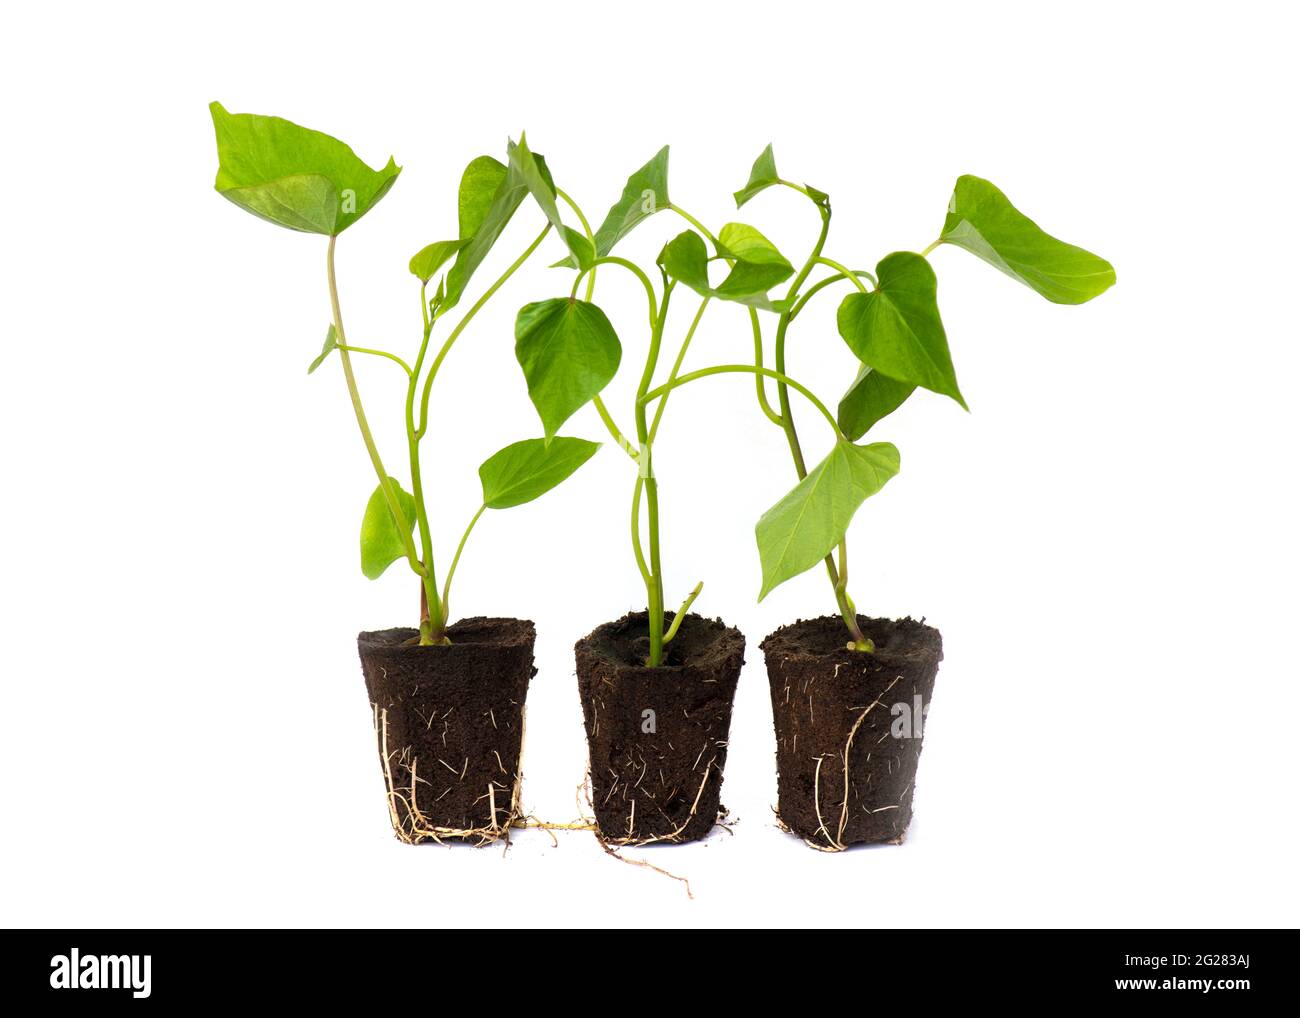 three rooted sprouting sweet potato slips, a dicotyledonous plant Convolvulaceae related to the bindweed or morning glory family, isolated on a white Stock Photo